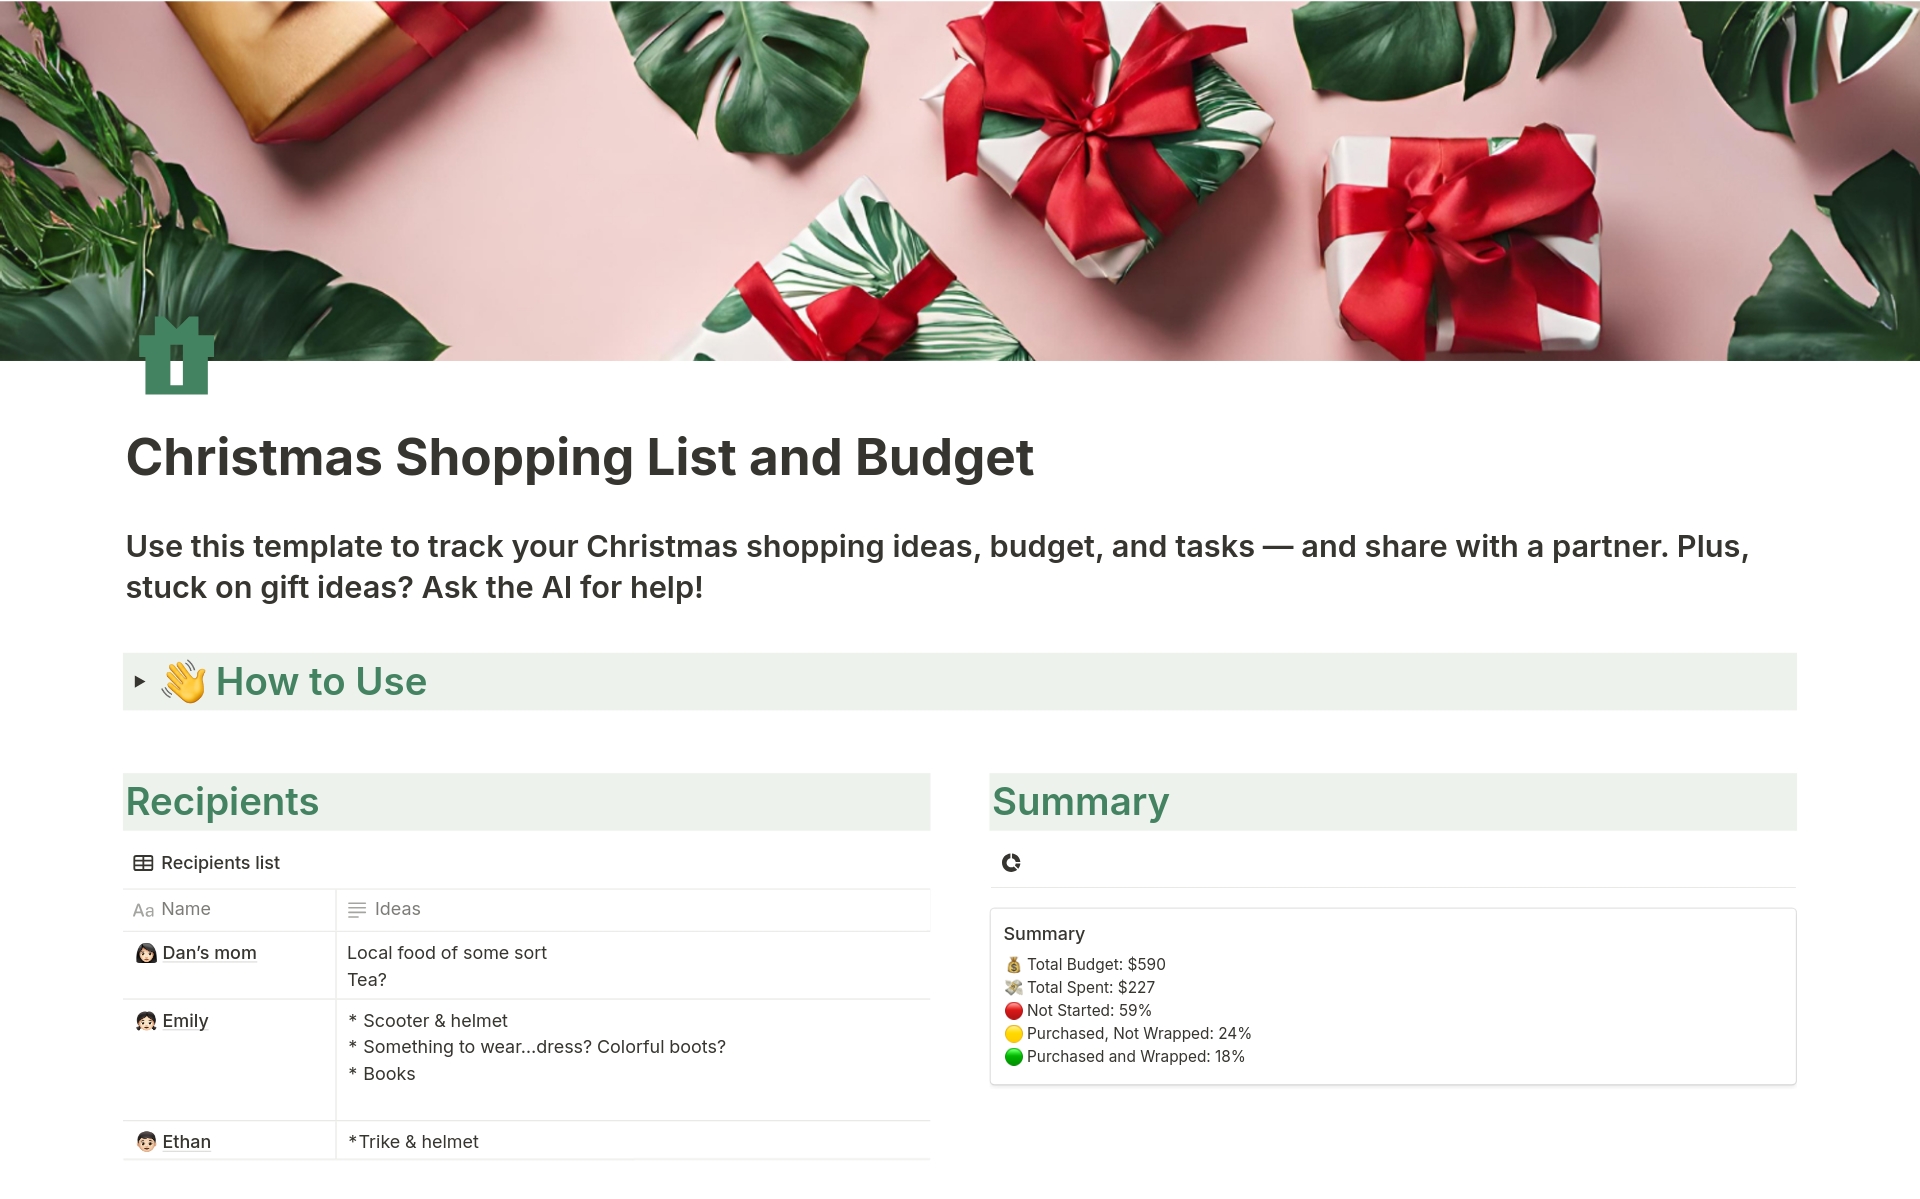 Use this template to track your Christmas shopping ideas, budget, and tasks — and share with a partner. Plus, stuck on gift ideas? Ask the AI for help!